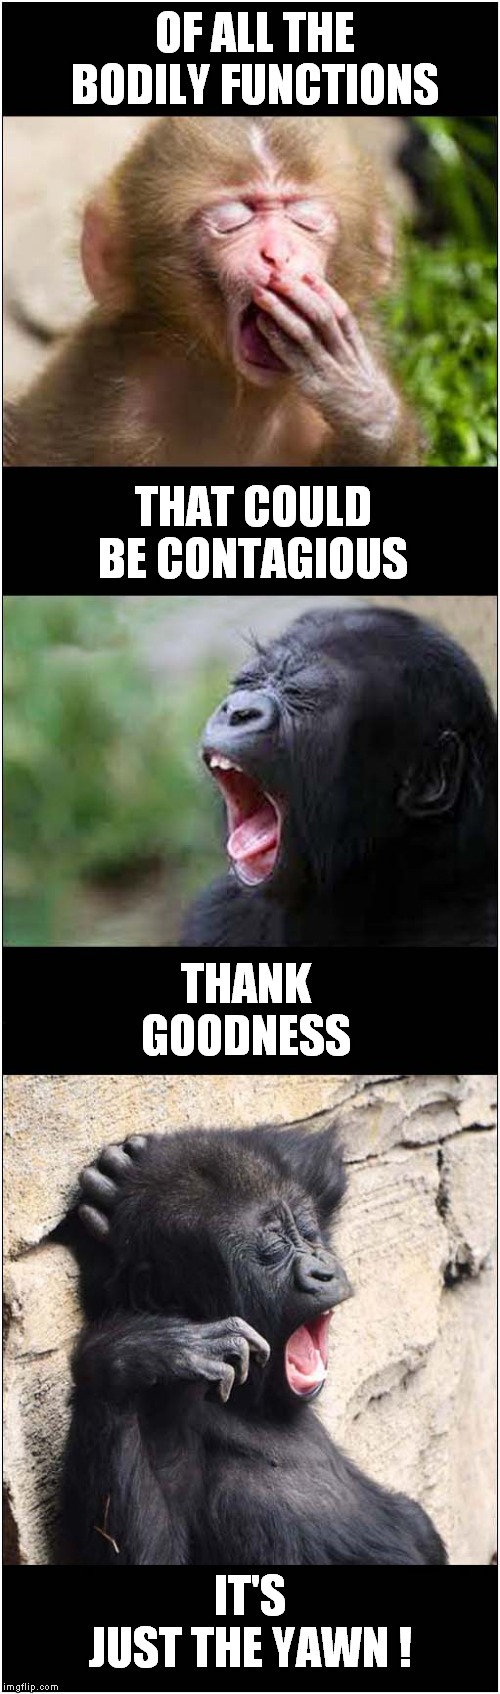 'You Mustn't Yawn' Challenge ! | OF ALL THE BODILY FUNCTIONS; THAT COULD BE CONTAGIOUS; THANK GOODNESS; IT'S JUST THE YAWN ! | image tagged in fun,baby apes,yawning | made w/ Imgflip meme maker